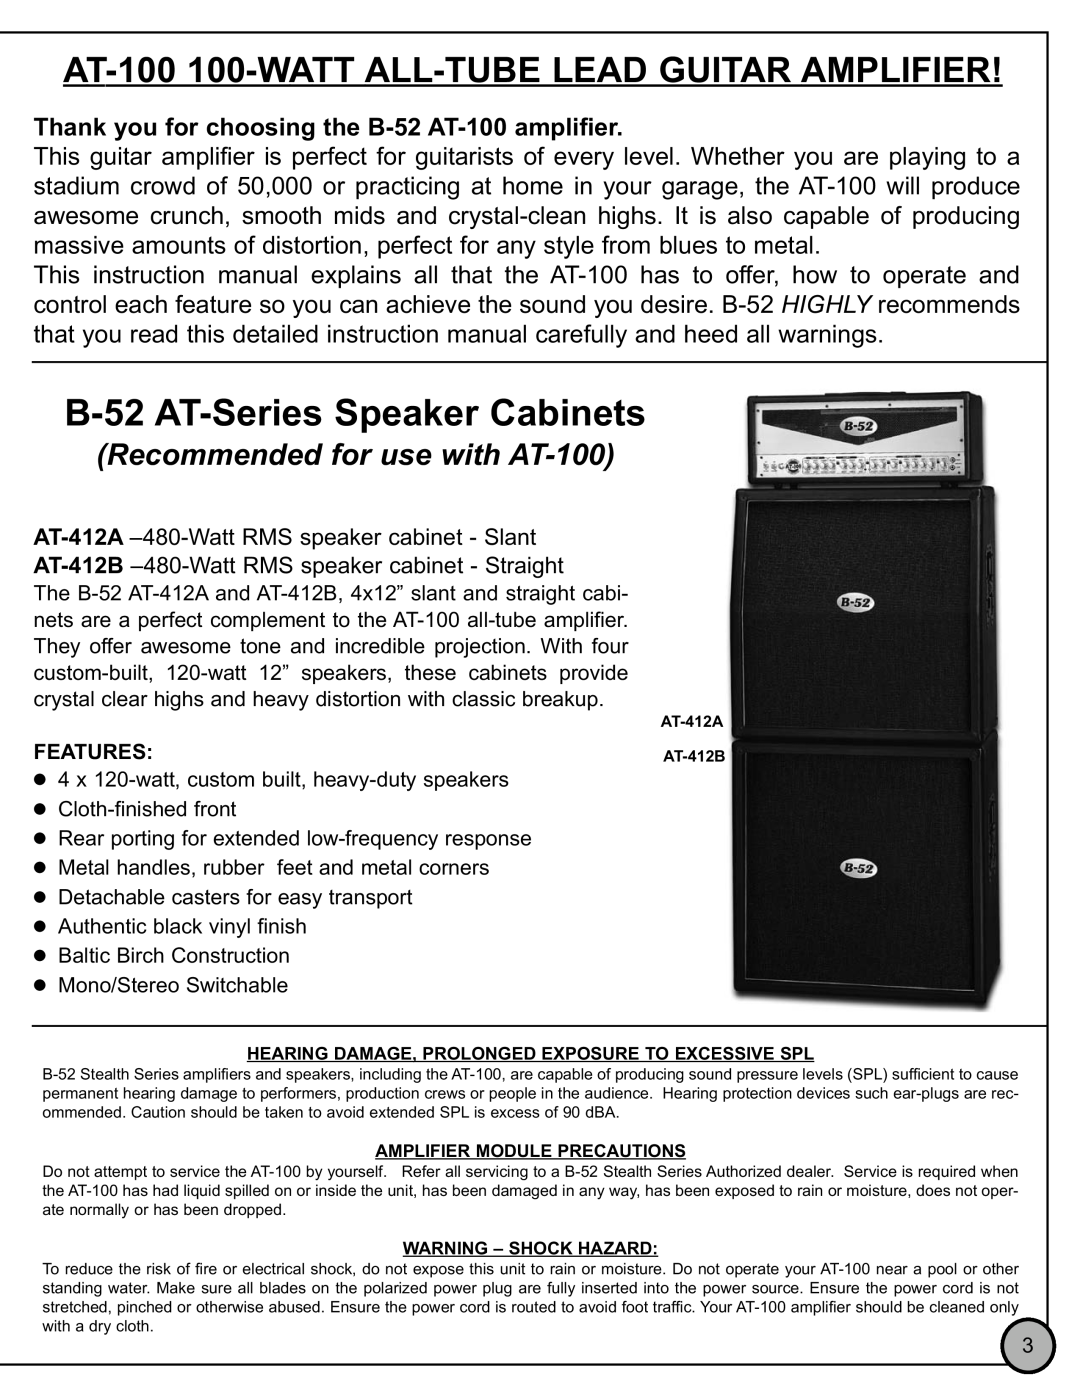 ETI Sound Systems, INC Thank you for choosing the B-52 AT-100amplifier, Features, B-52 AT-SeriesSpeaker Cabinets 